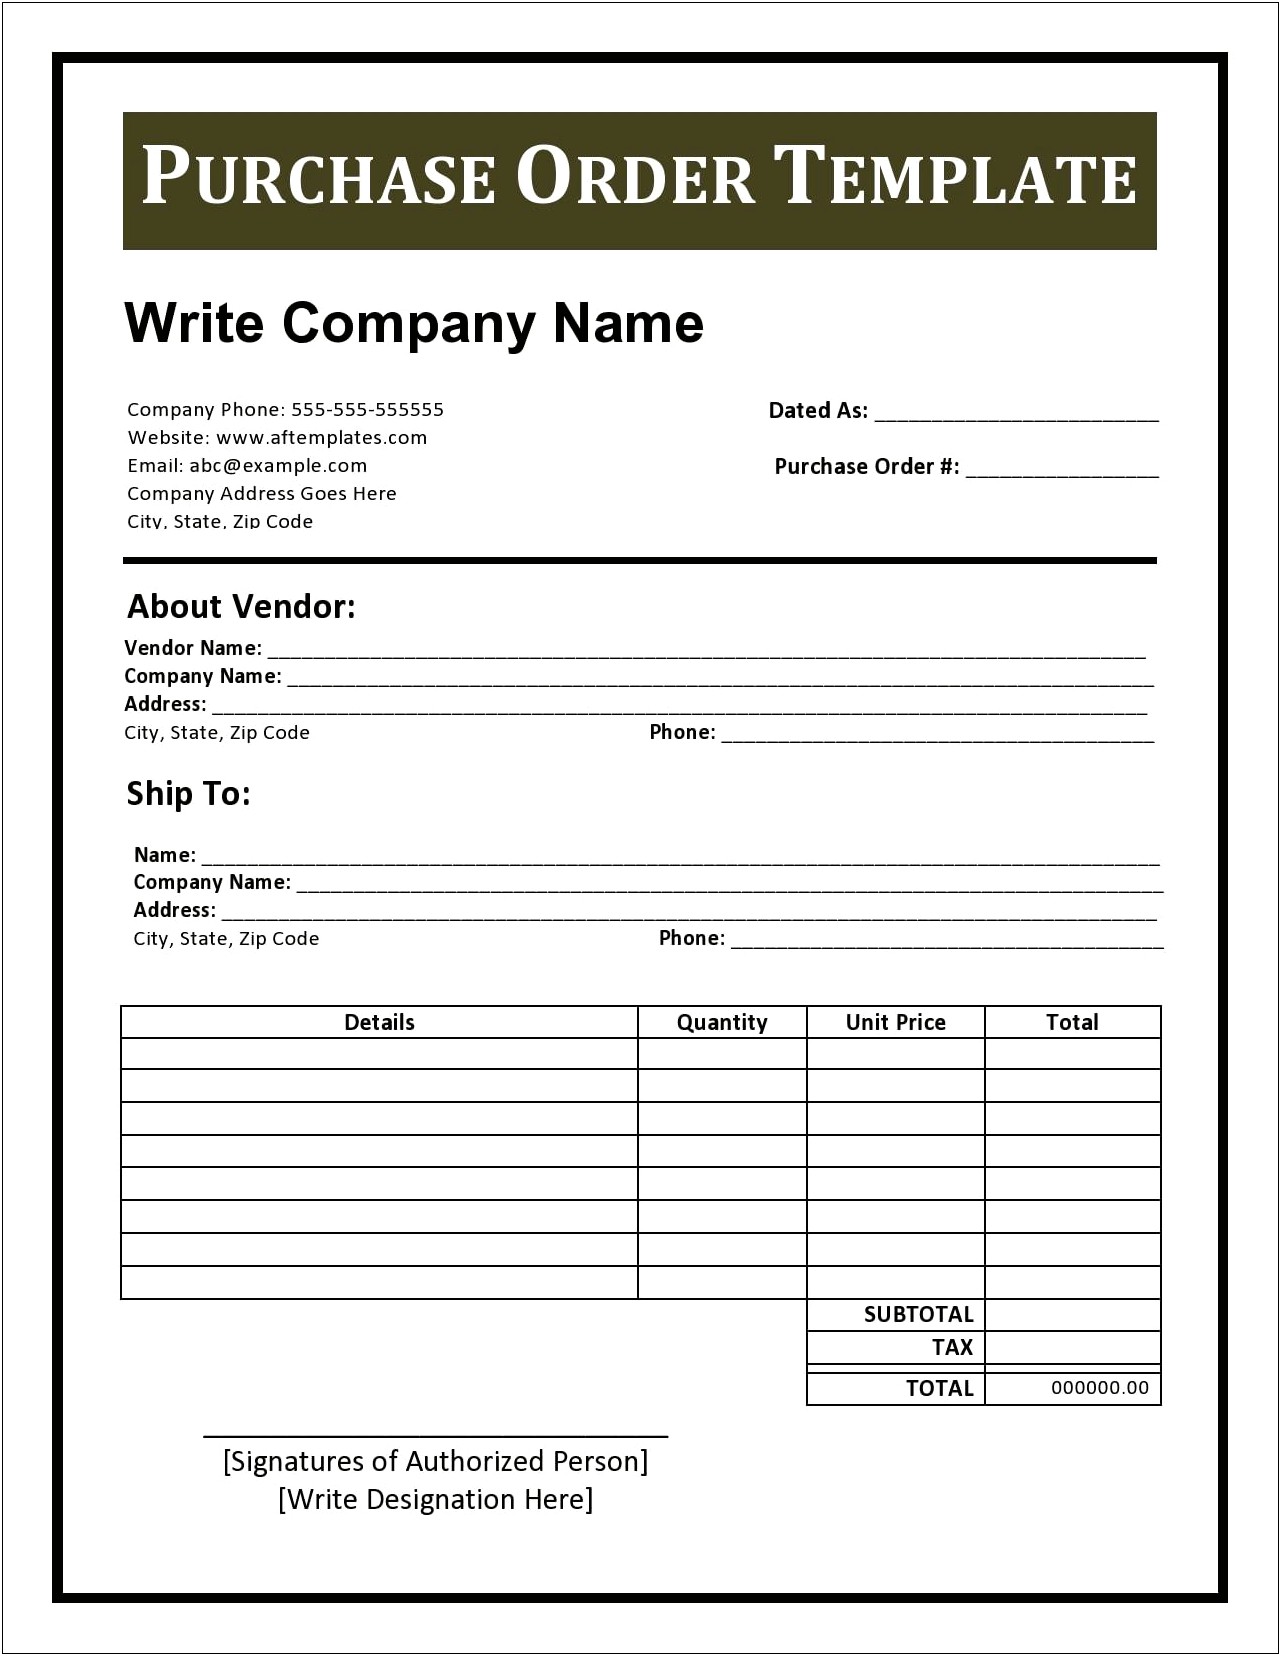 Free Purchase Order Request Form Template